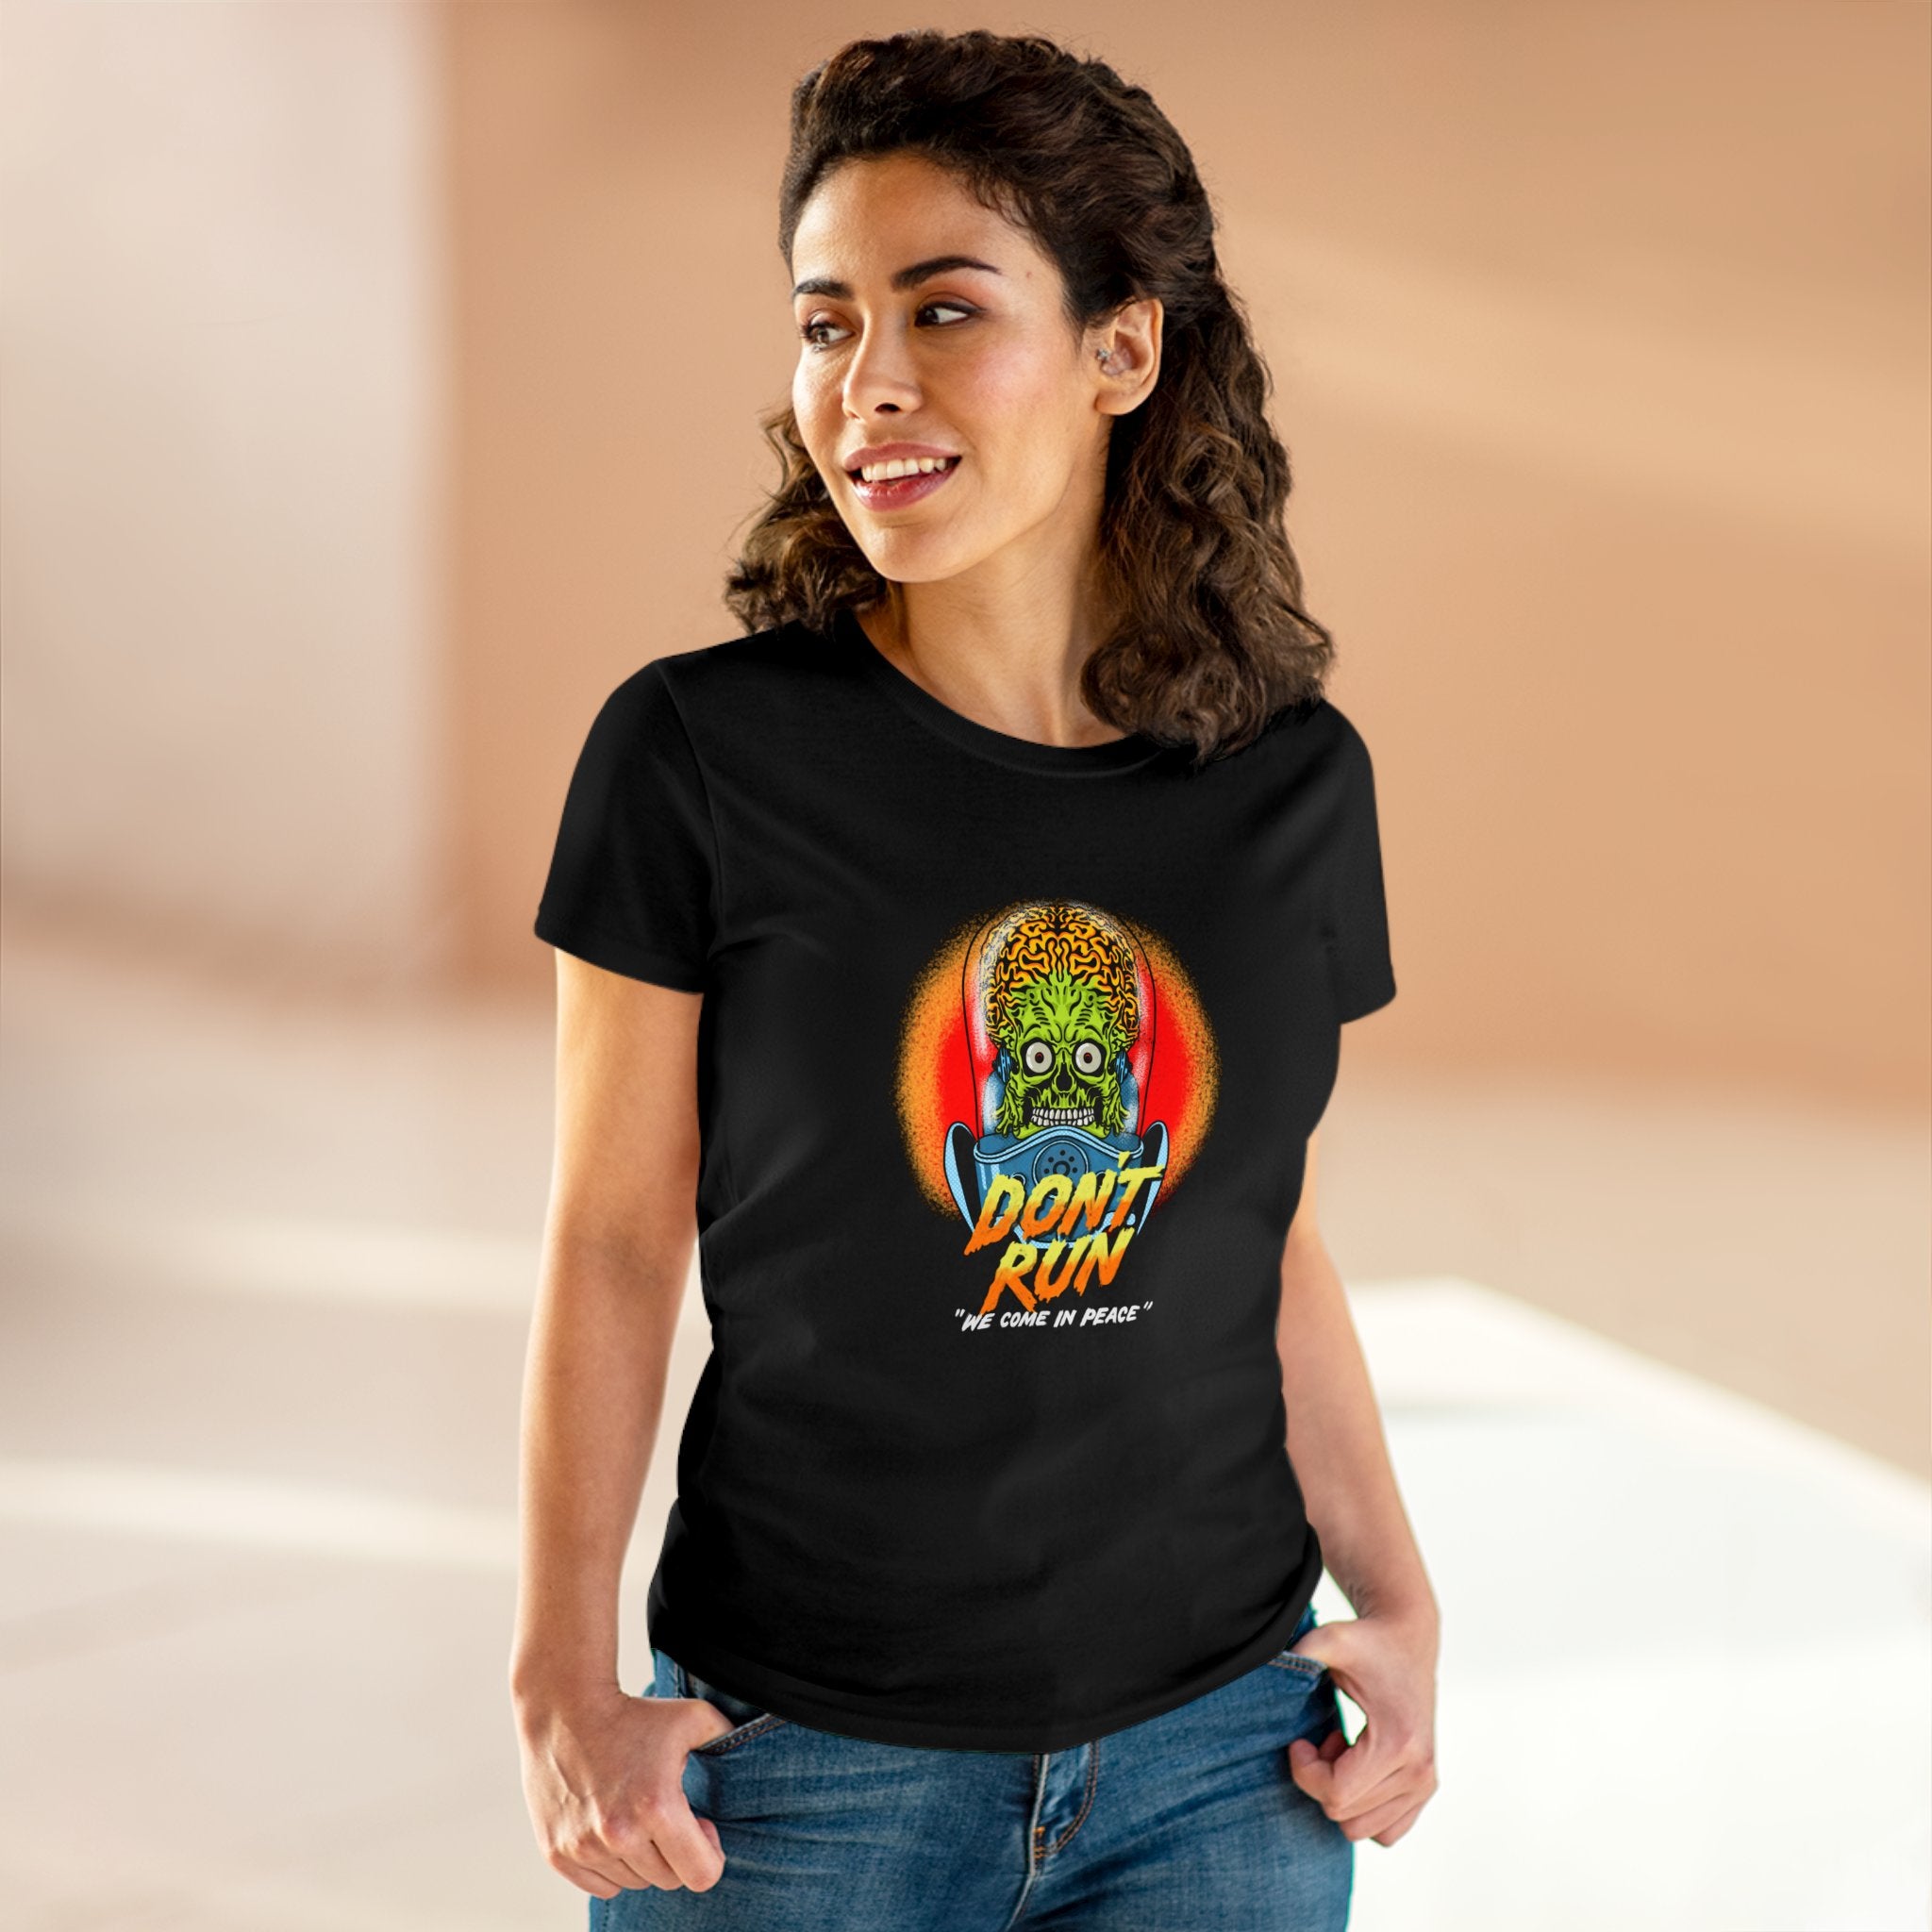 A woman wearing a black T-shirt with a colorful graphic and the text "Don't Run" stands in an indoor setting with a light brown background. The soft cotton fabric of the Don't Run - Women's Tee ensures a great fit.